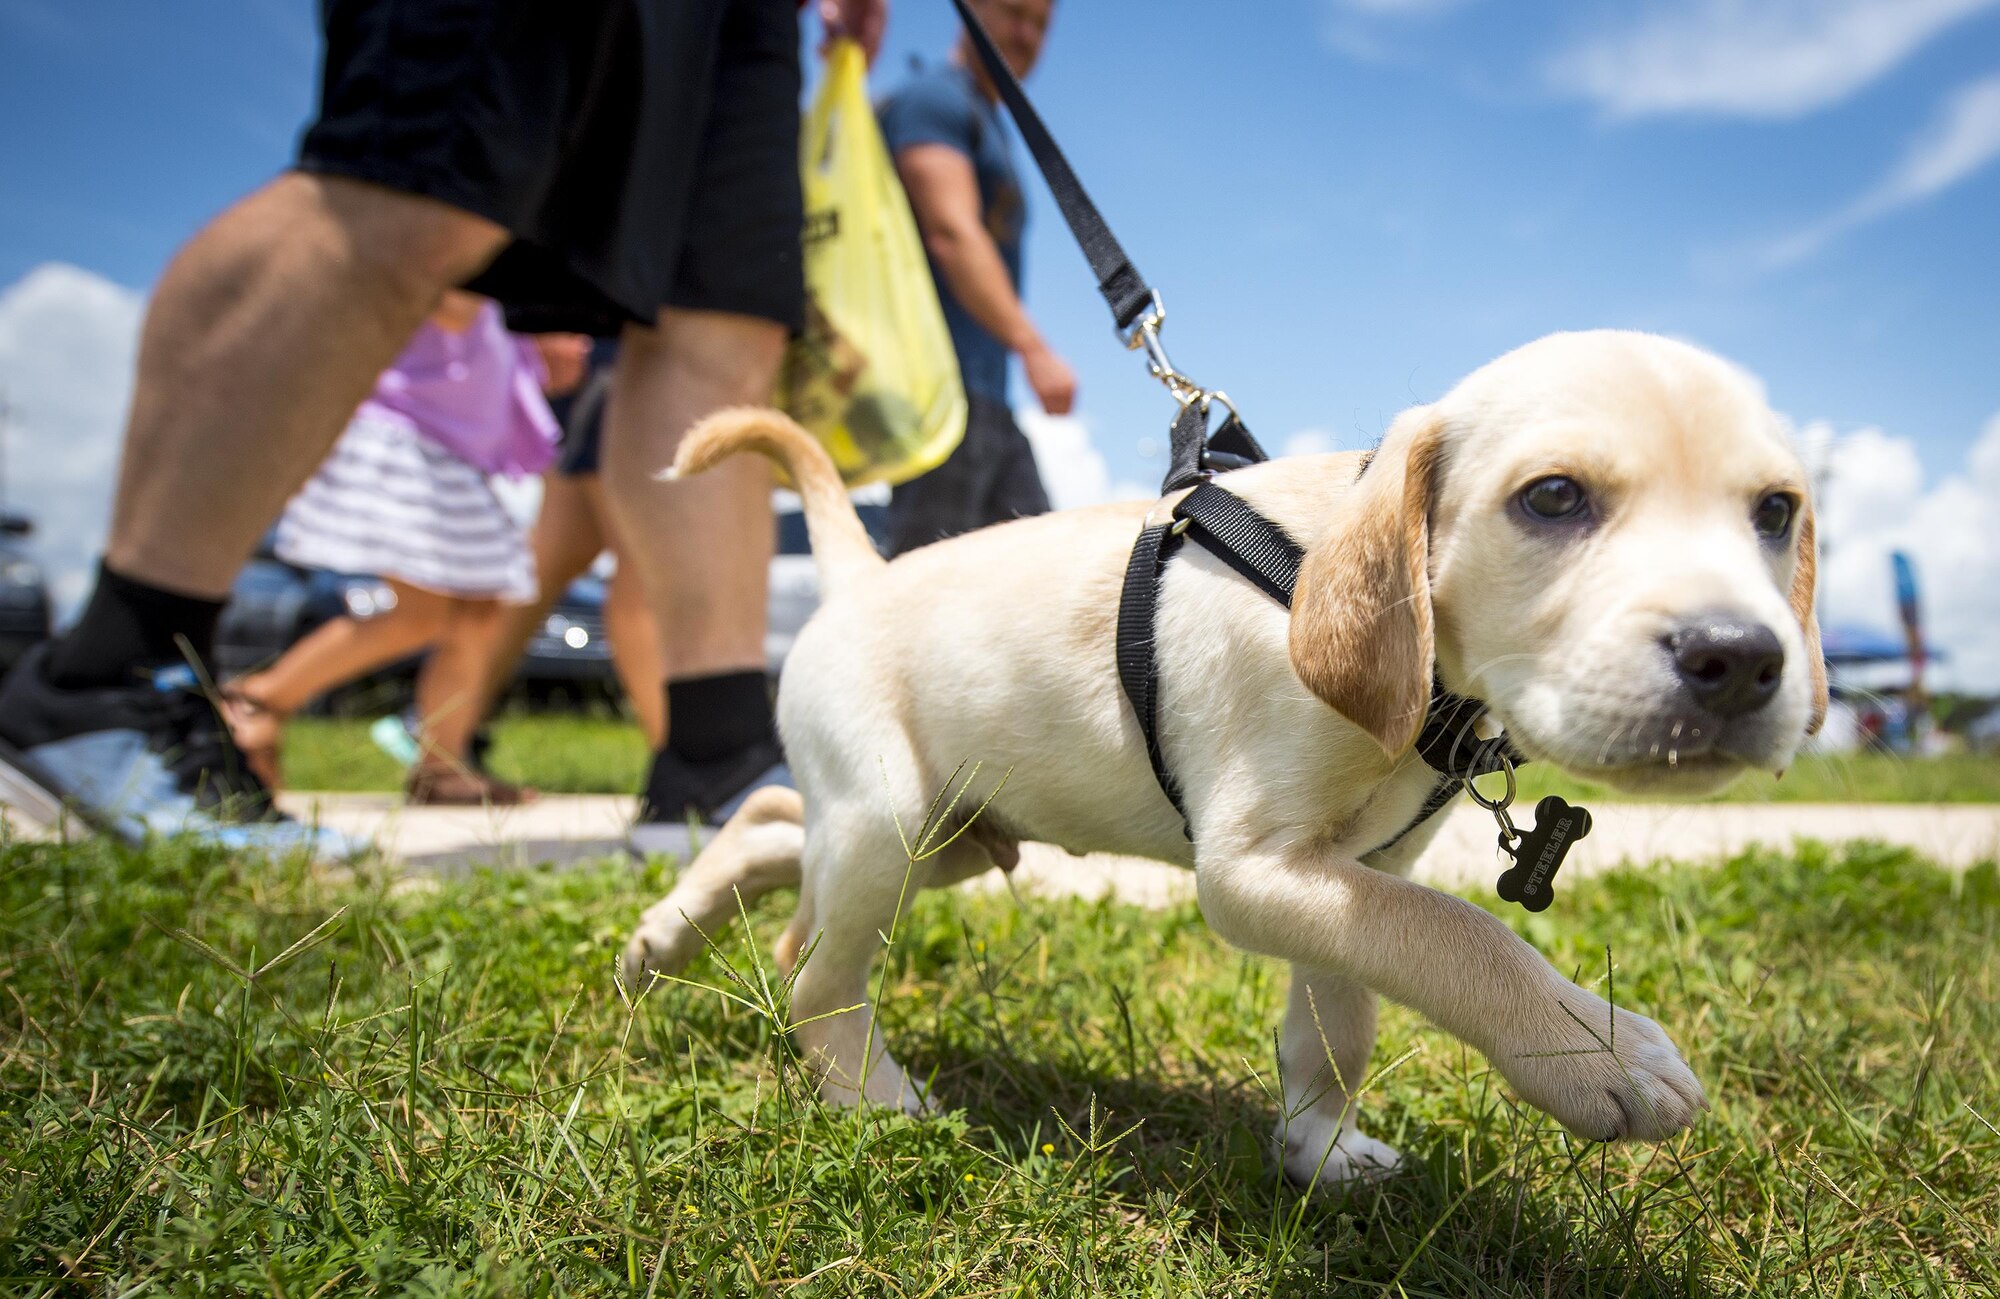 A puppy sniffs out the festivities happening at the Eglin Connects event at Eglin Air Force Base, Fla., June 2.  The event to help promote resiliency featured information booths, sporting events and a car show.  (U.S. Air Force photo/Samuel King Jr.)